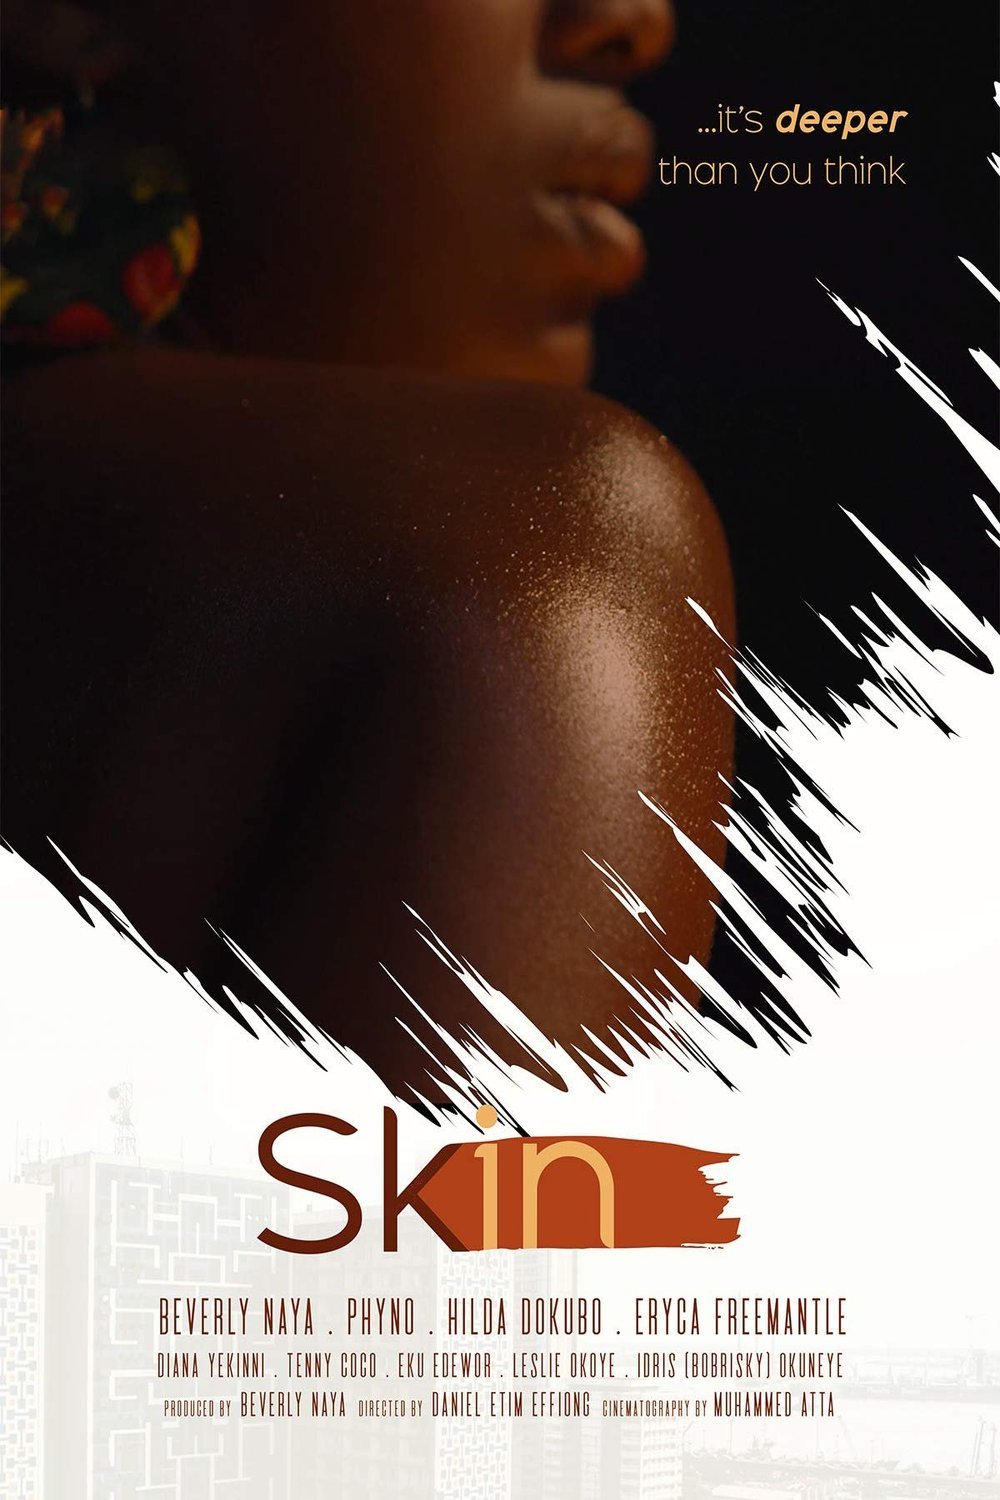 Poster of the movie Skin